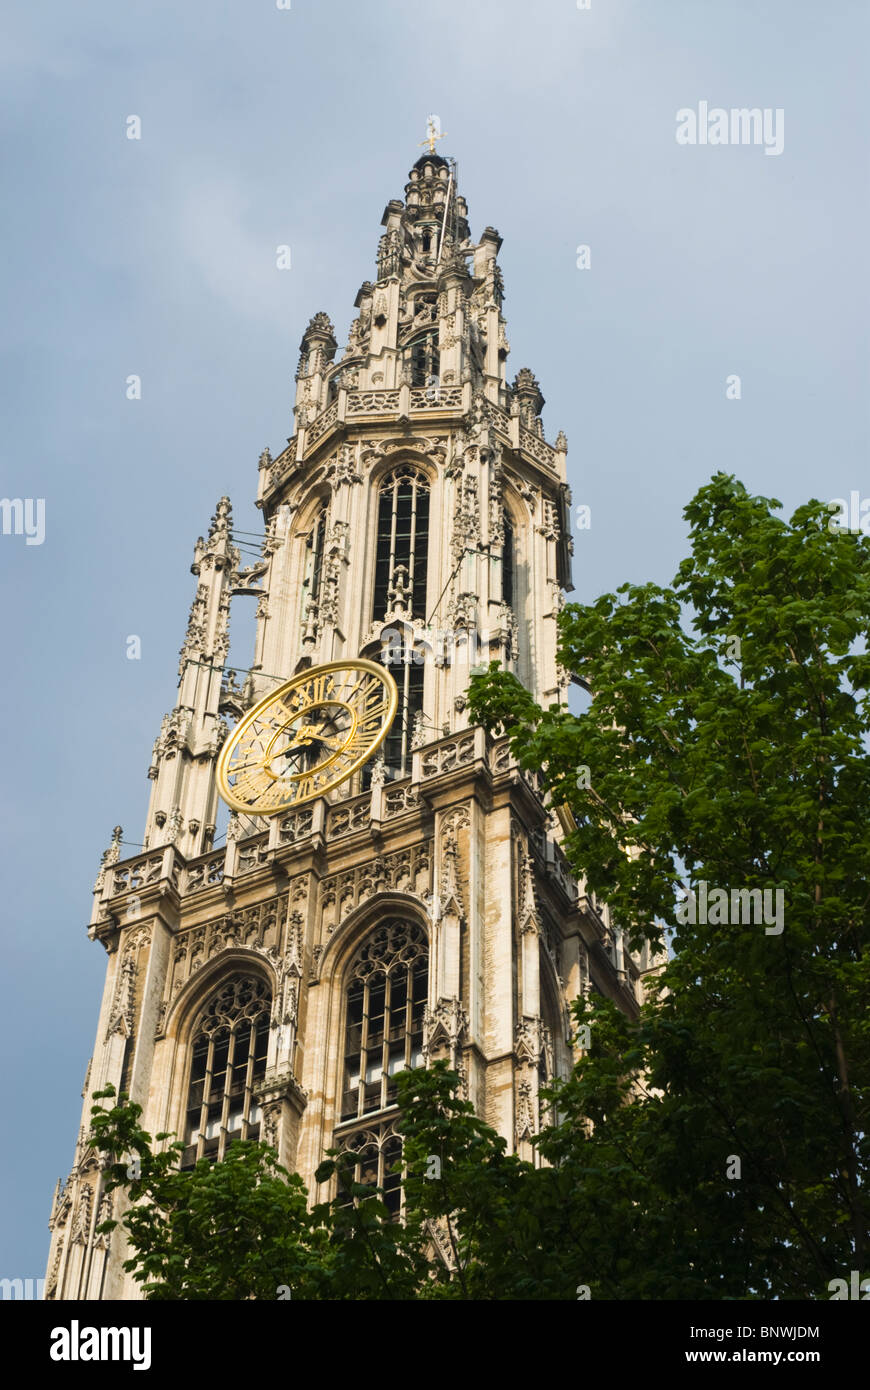 Belgium, Antwerp, Cathedral of Our Lady, Onze Lieve Vrouwekathedraal Stock Photo